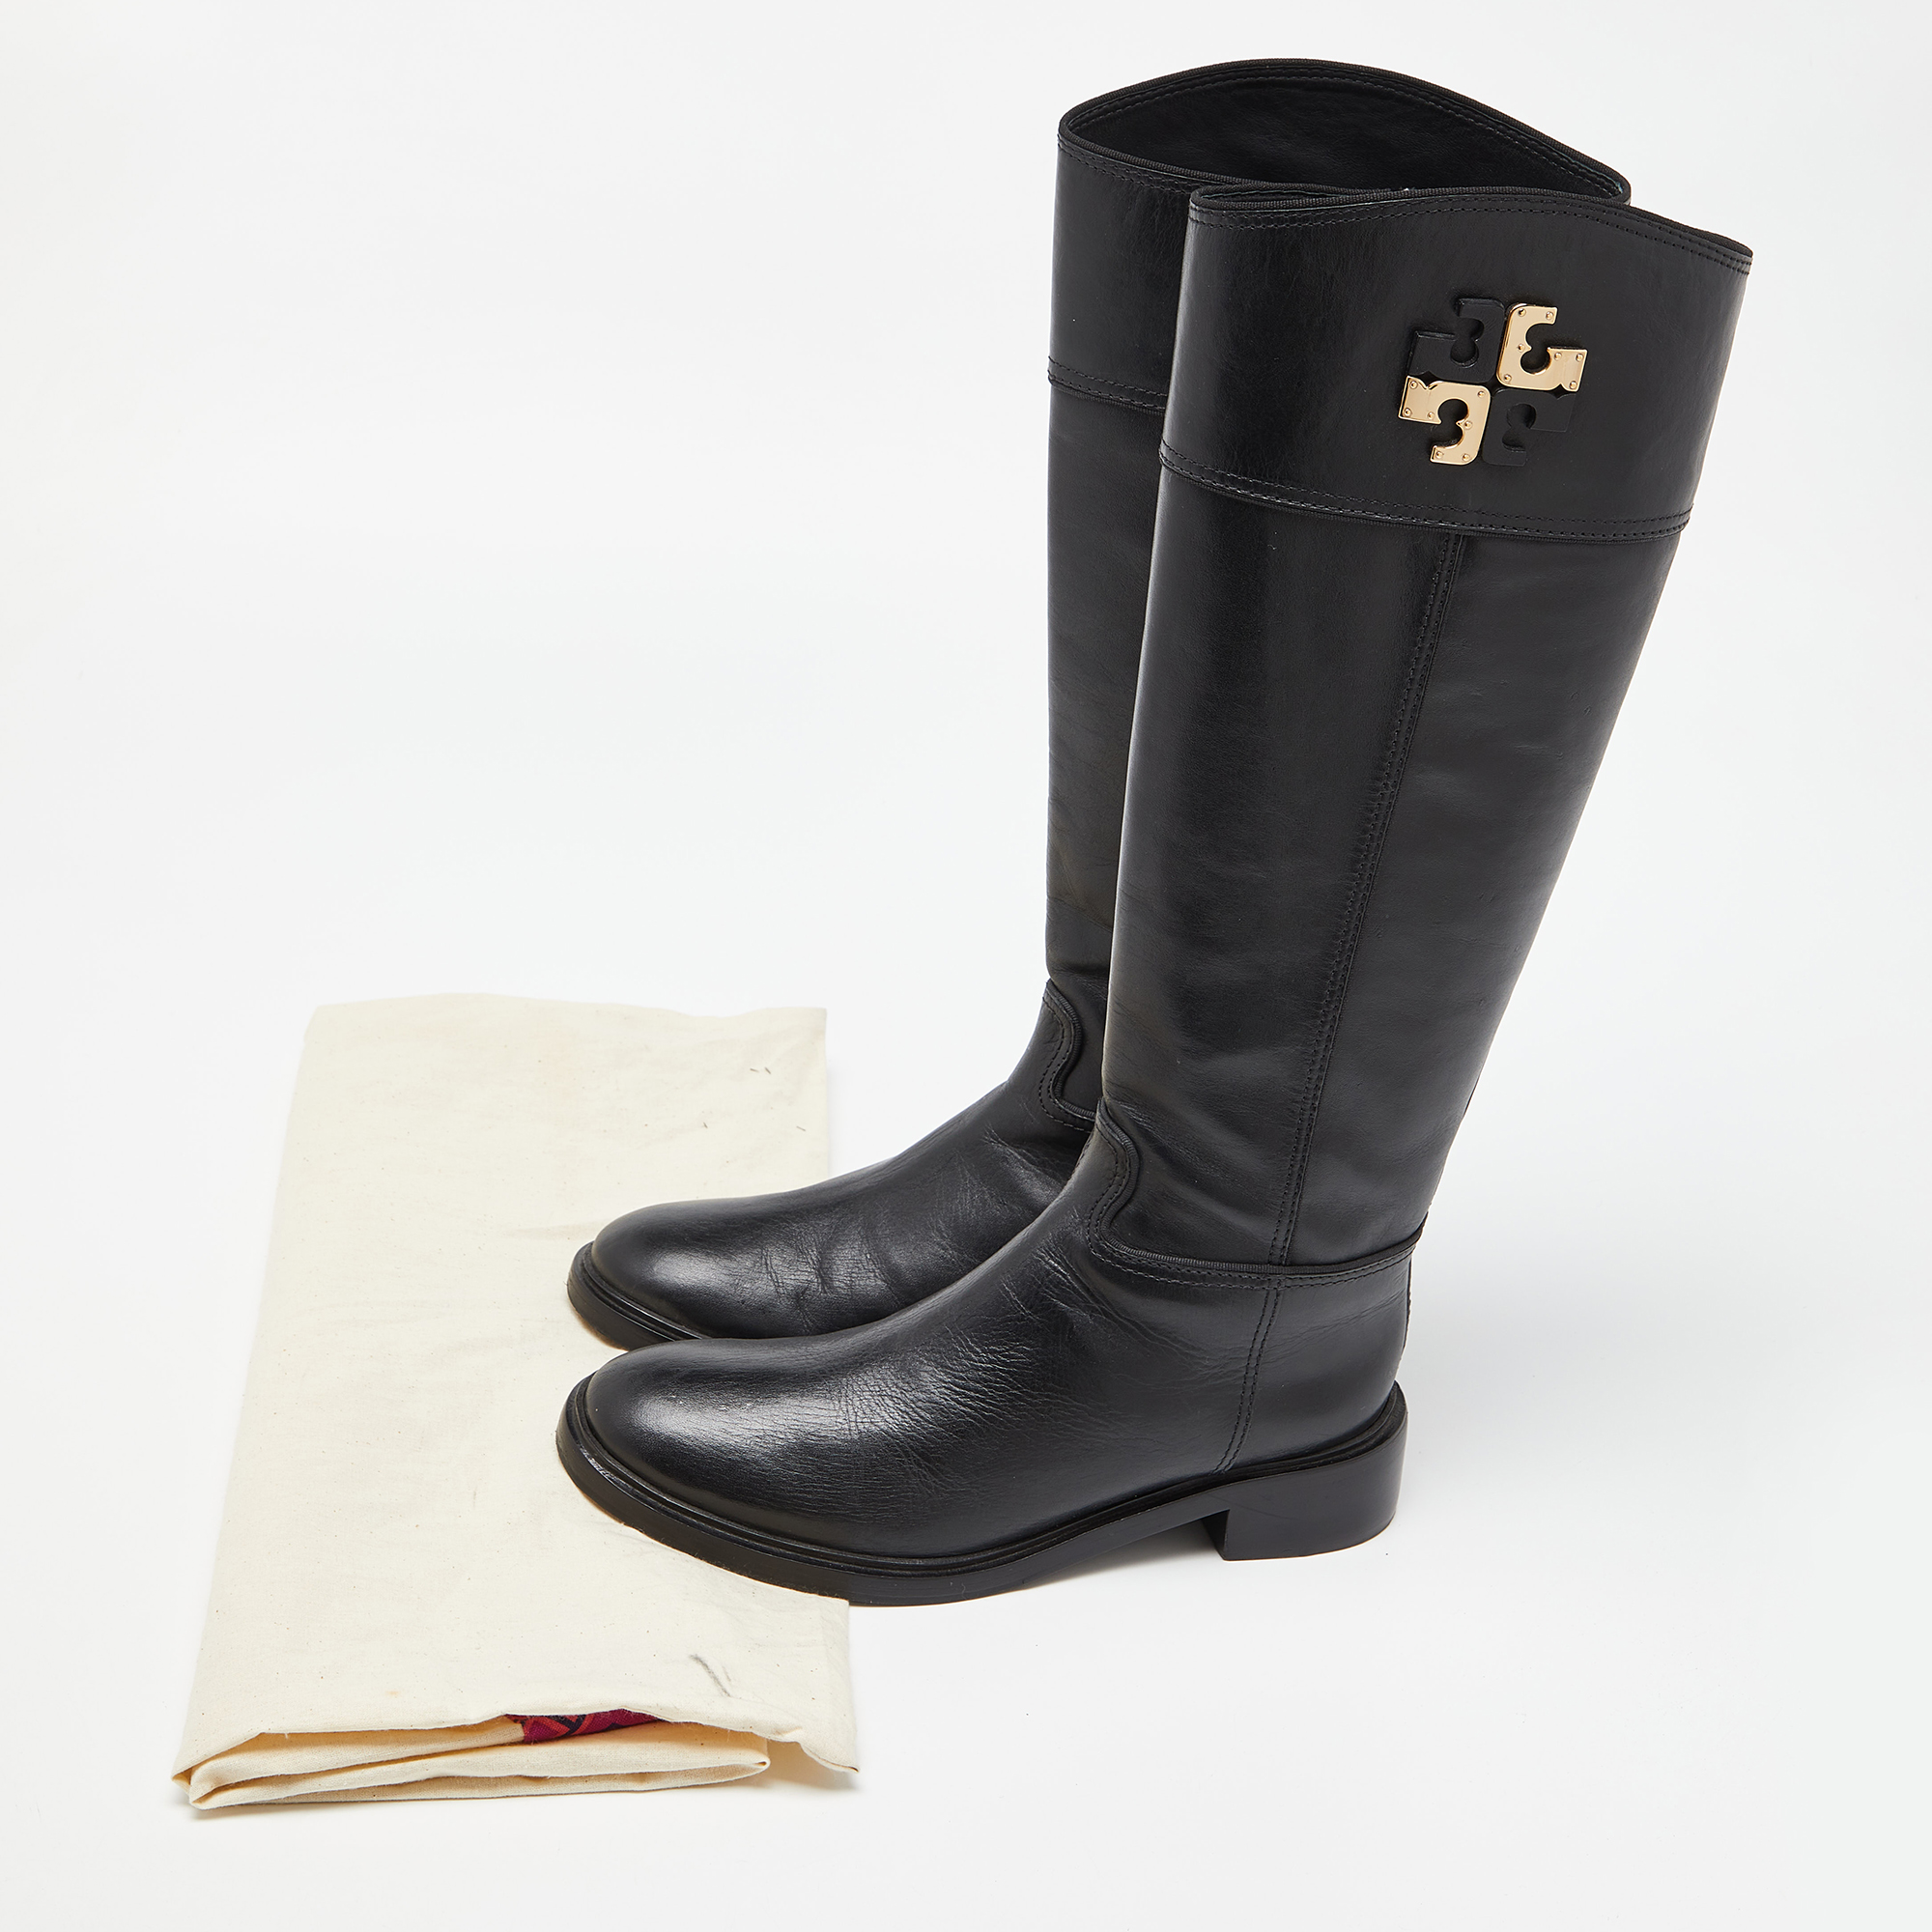 Tory Burch Black Leather Knee Length Boots Size 38.5